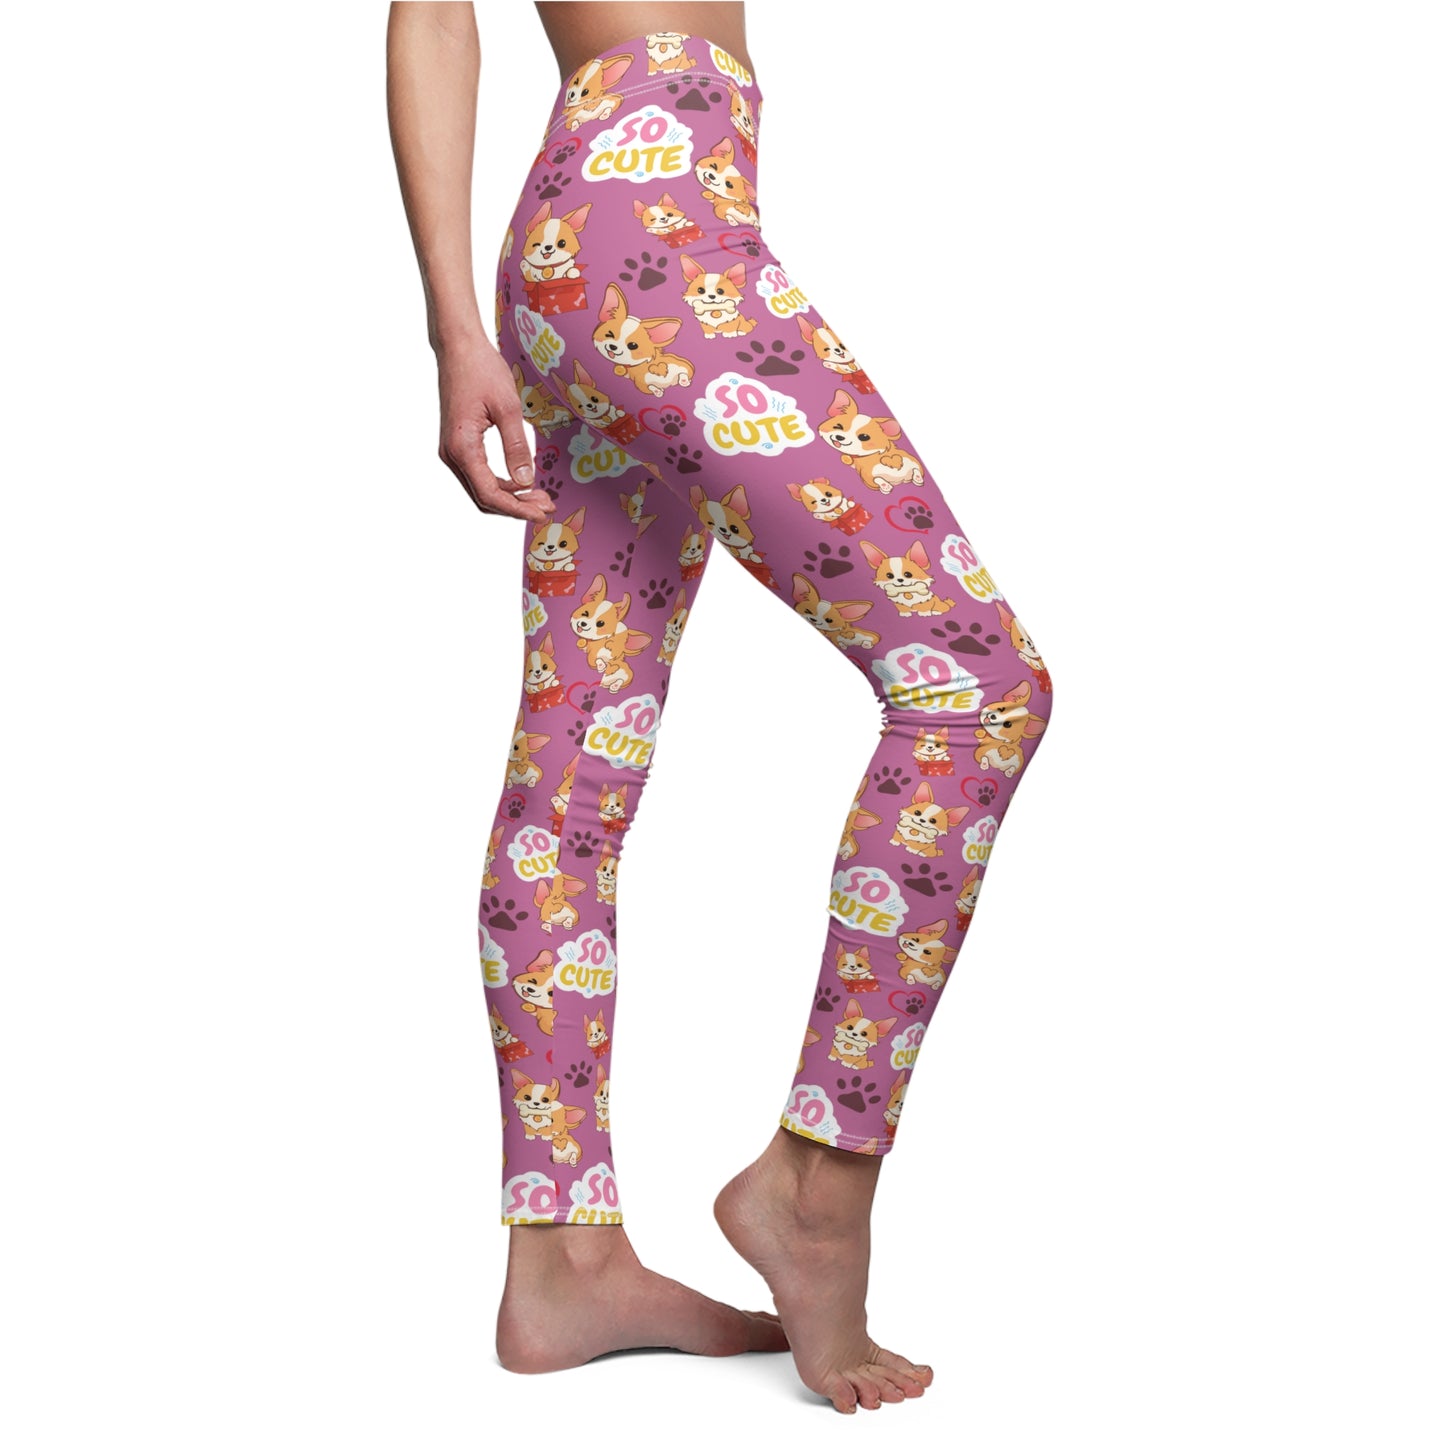 Corgi Lovers Women's Full-Length Leggings In Pink (Available In Other Colors)